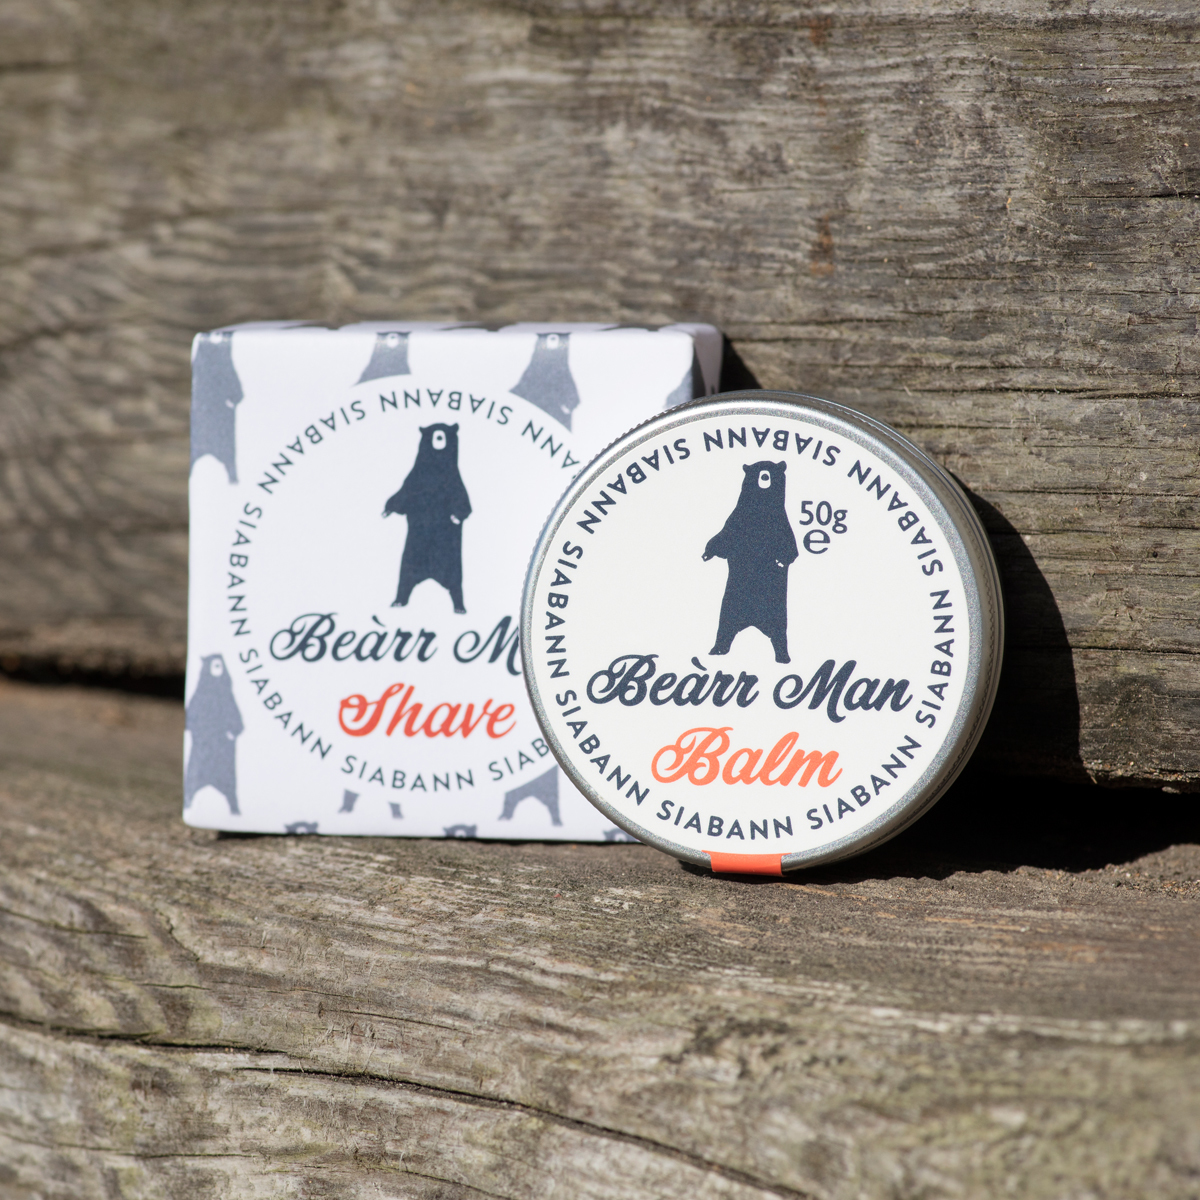 Bearr Man balm and shave